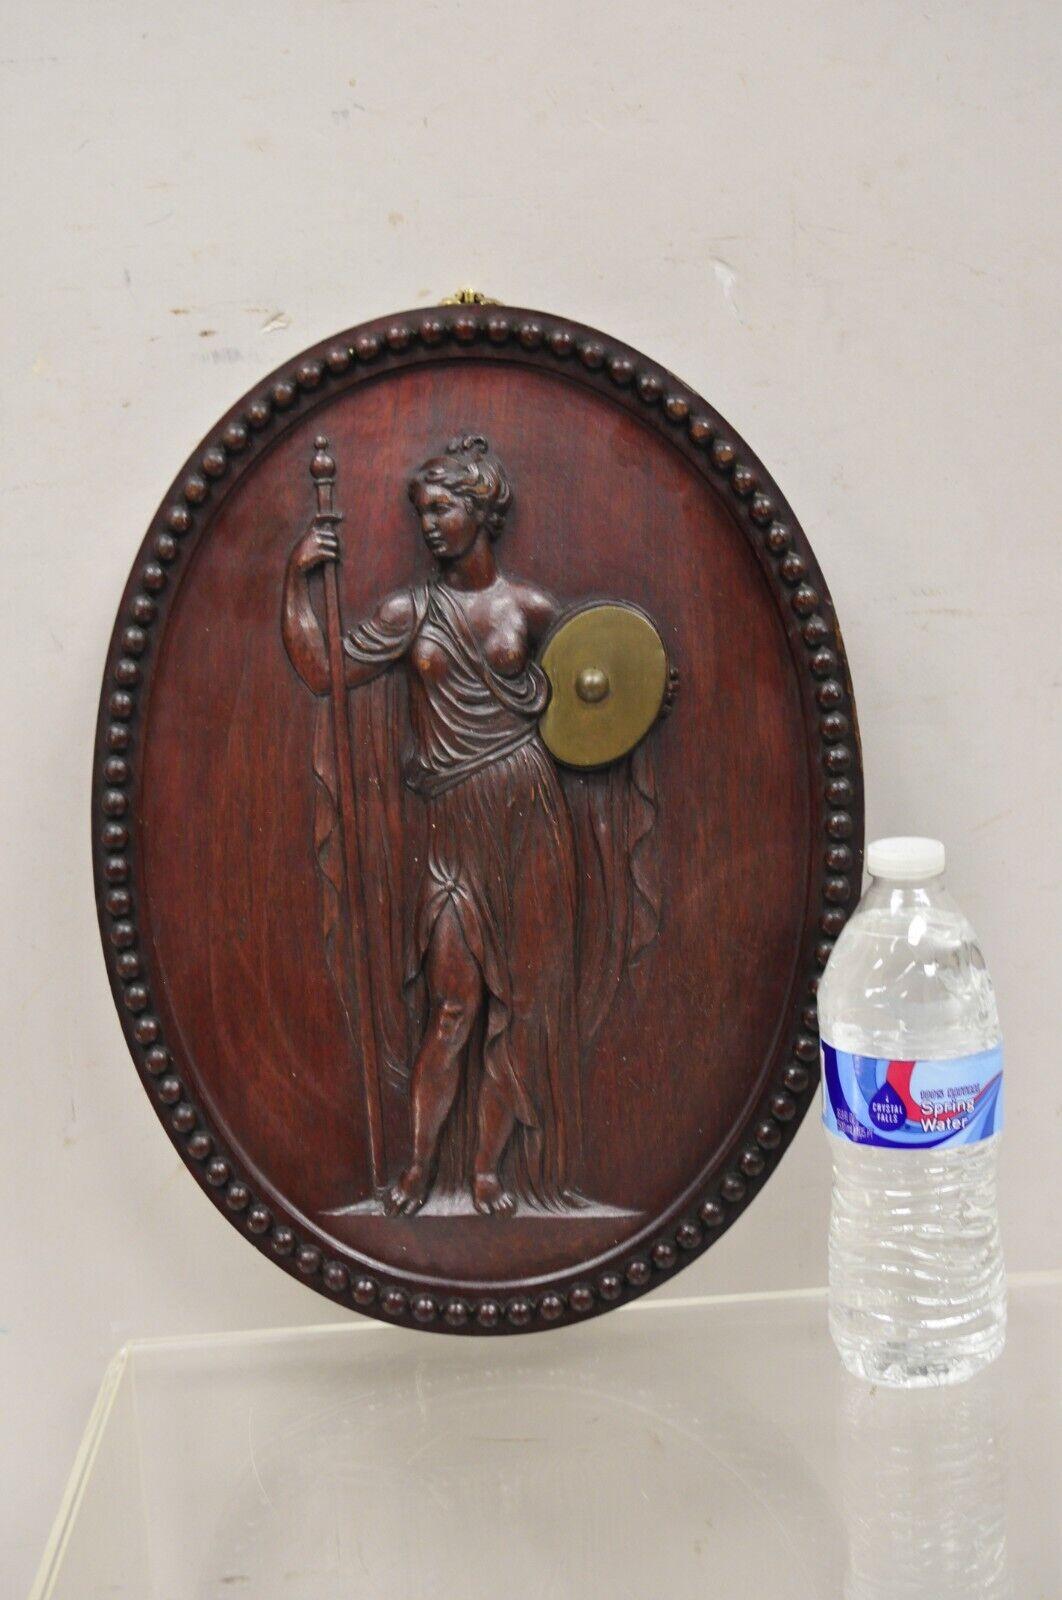 Antique Classical Oval Relief Carved Mahogany Figural Goddess Wall Sculpture Plaque. Circa Early 1900s. Measurements: 16